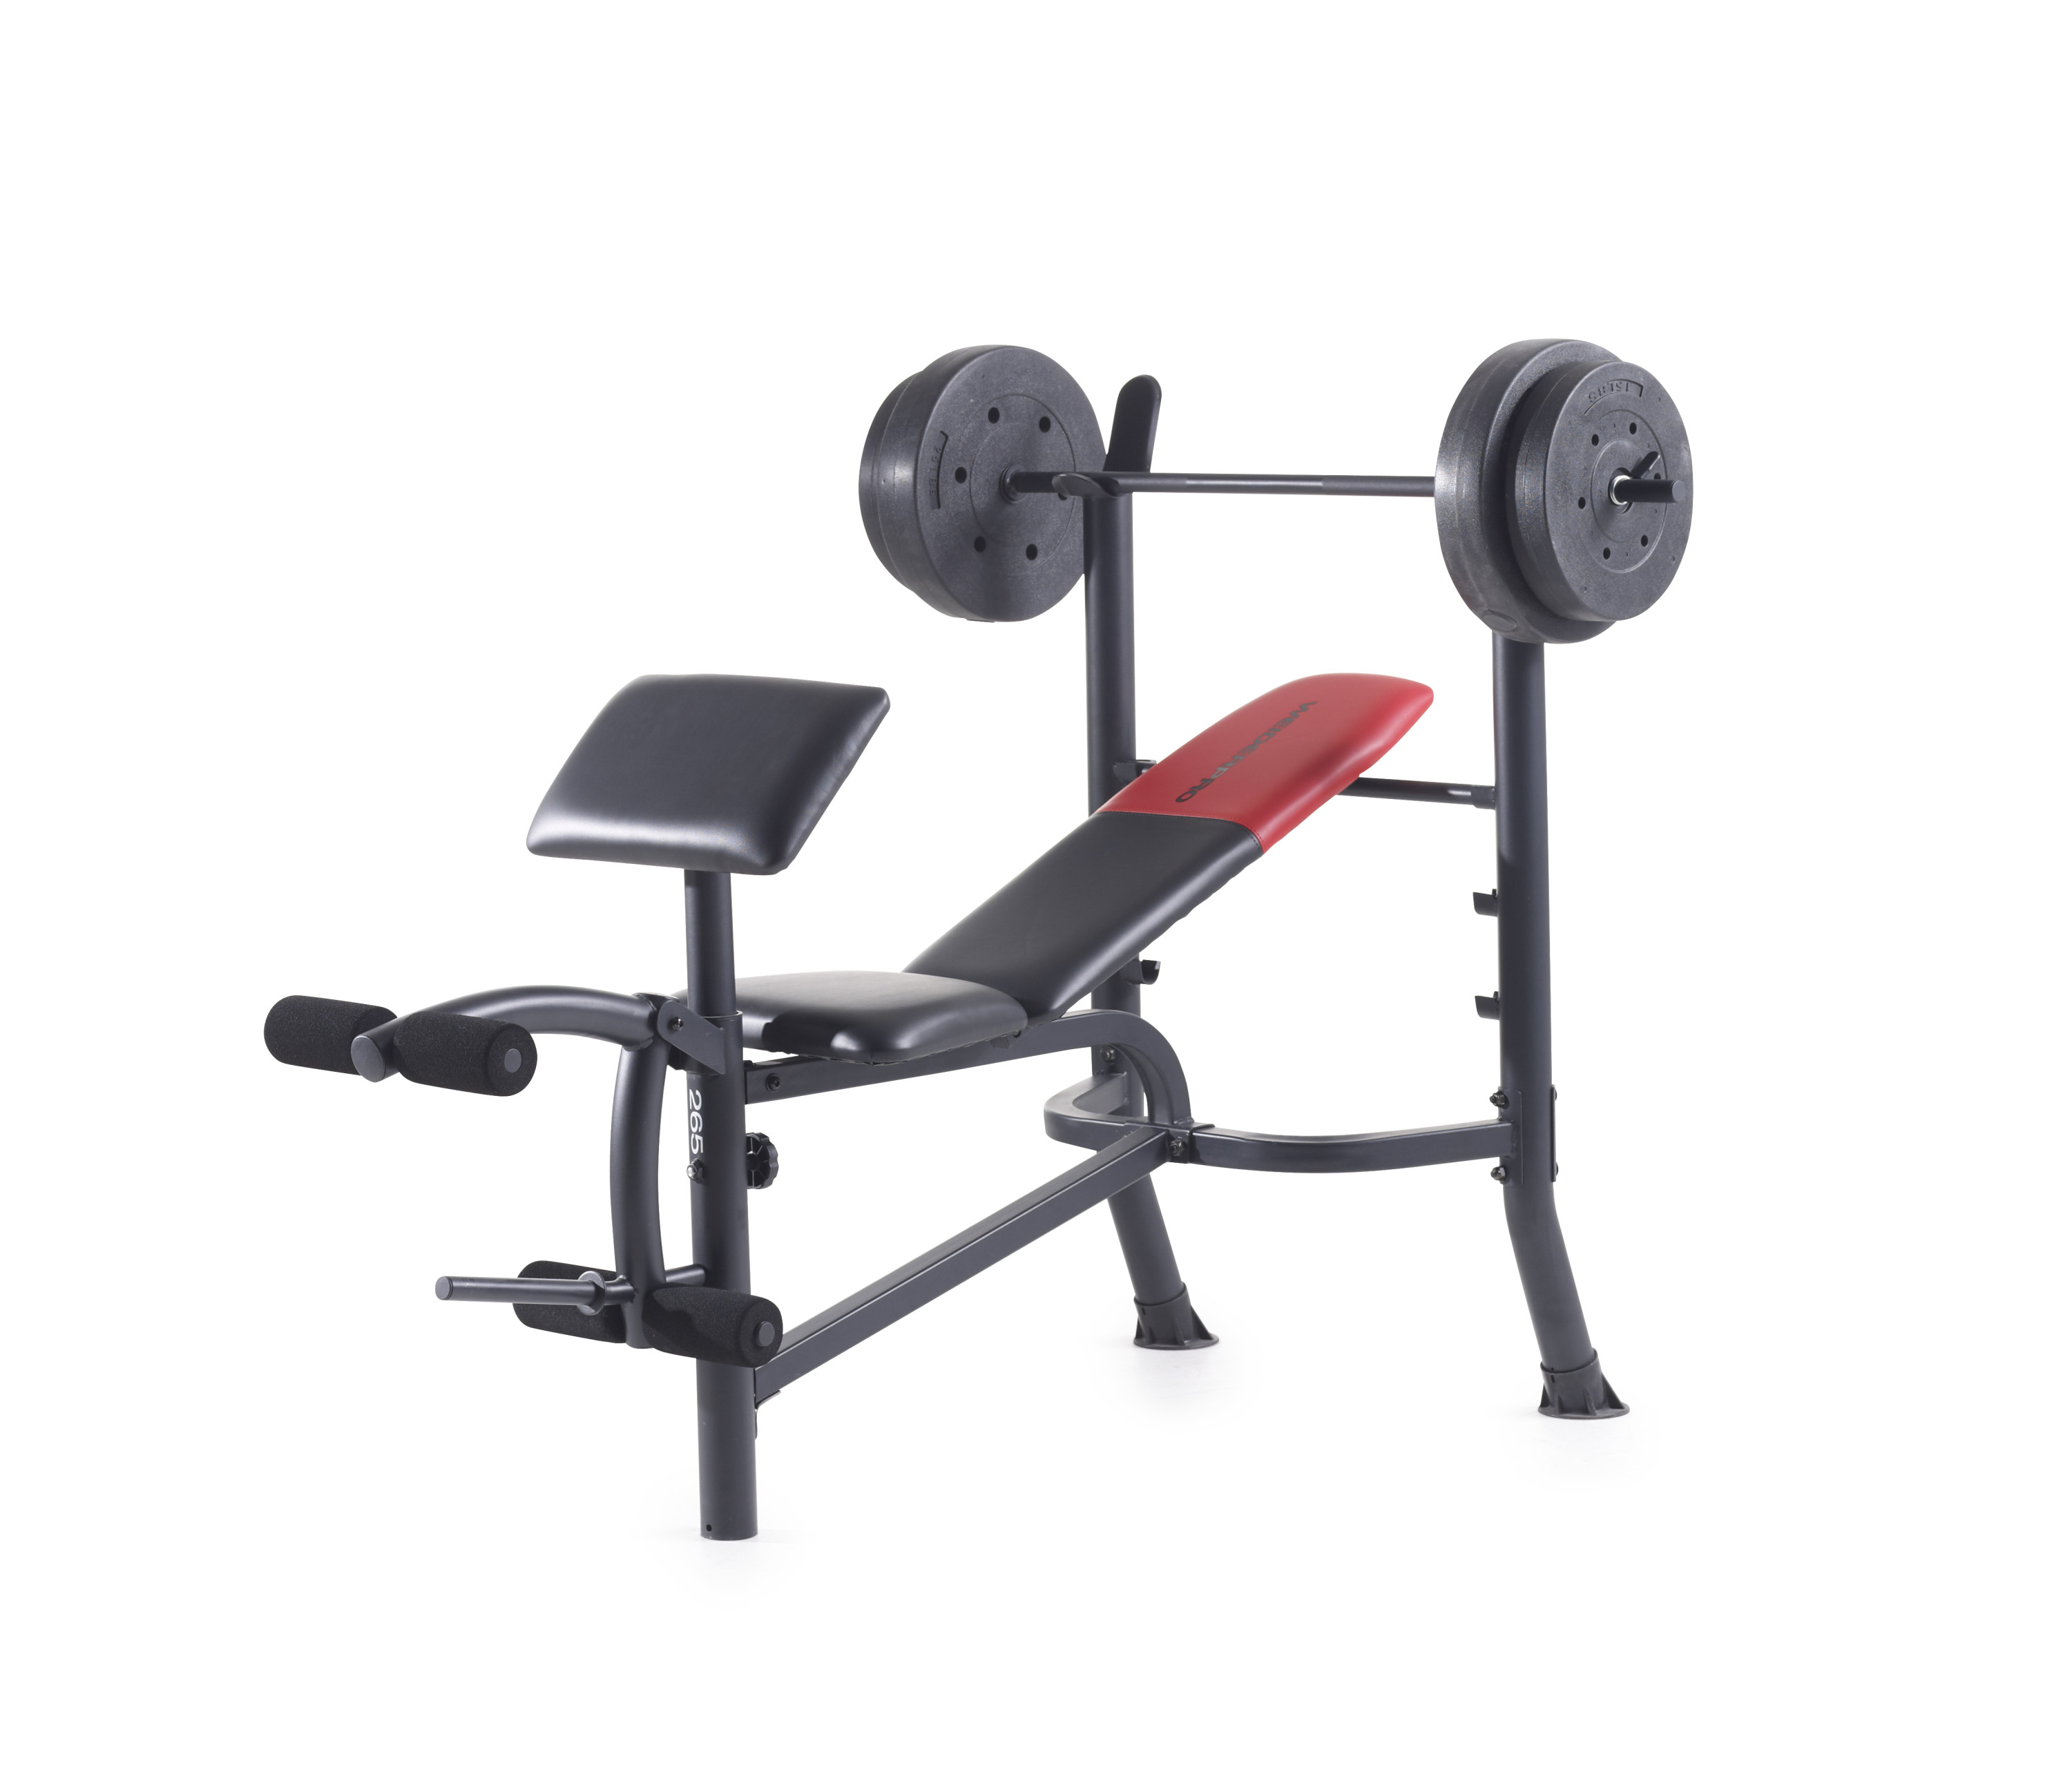 Weider Pro 265 Standard Weight Bench with 80 lb. Vinyl Weight Set - image 3 of 8